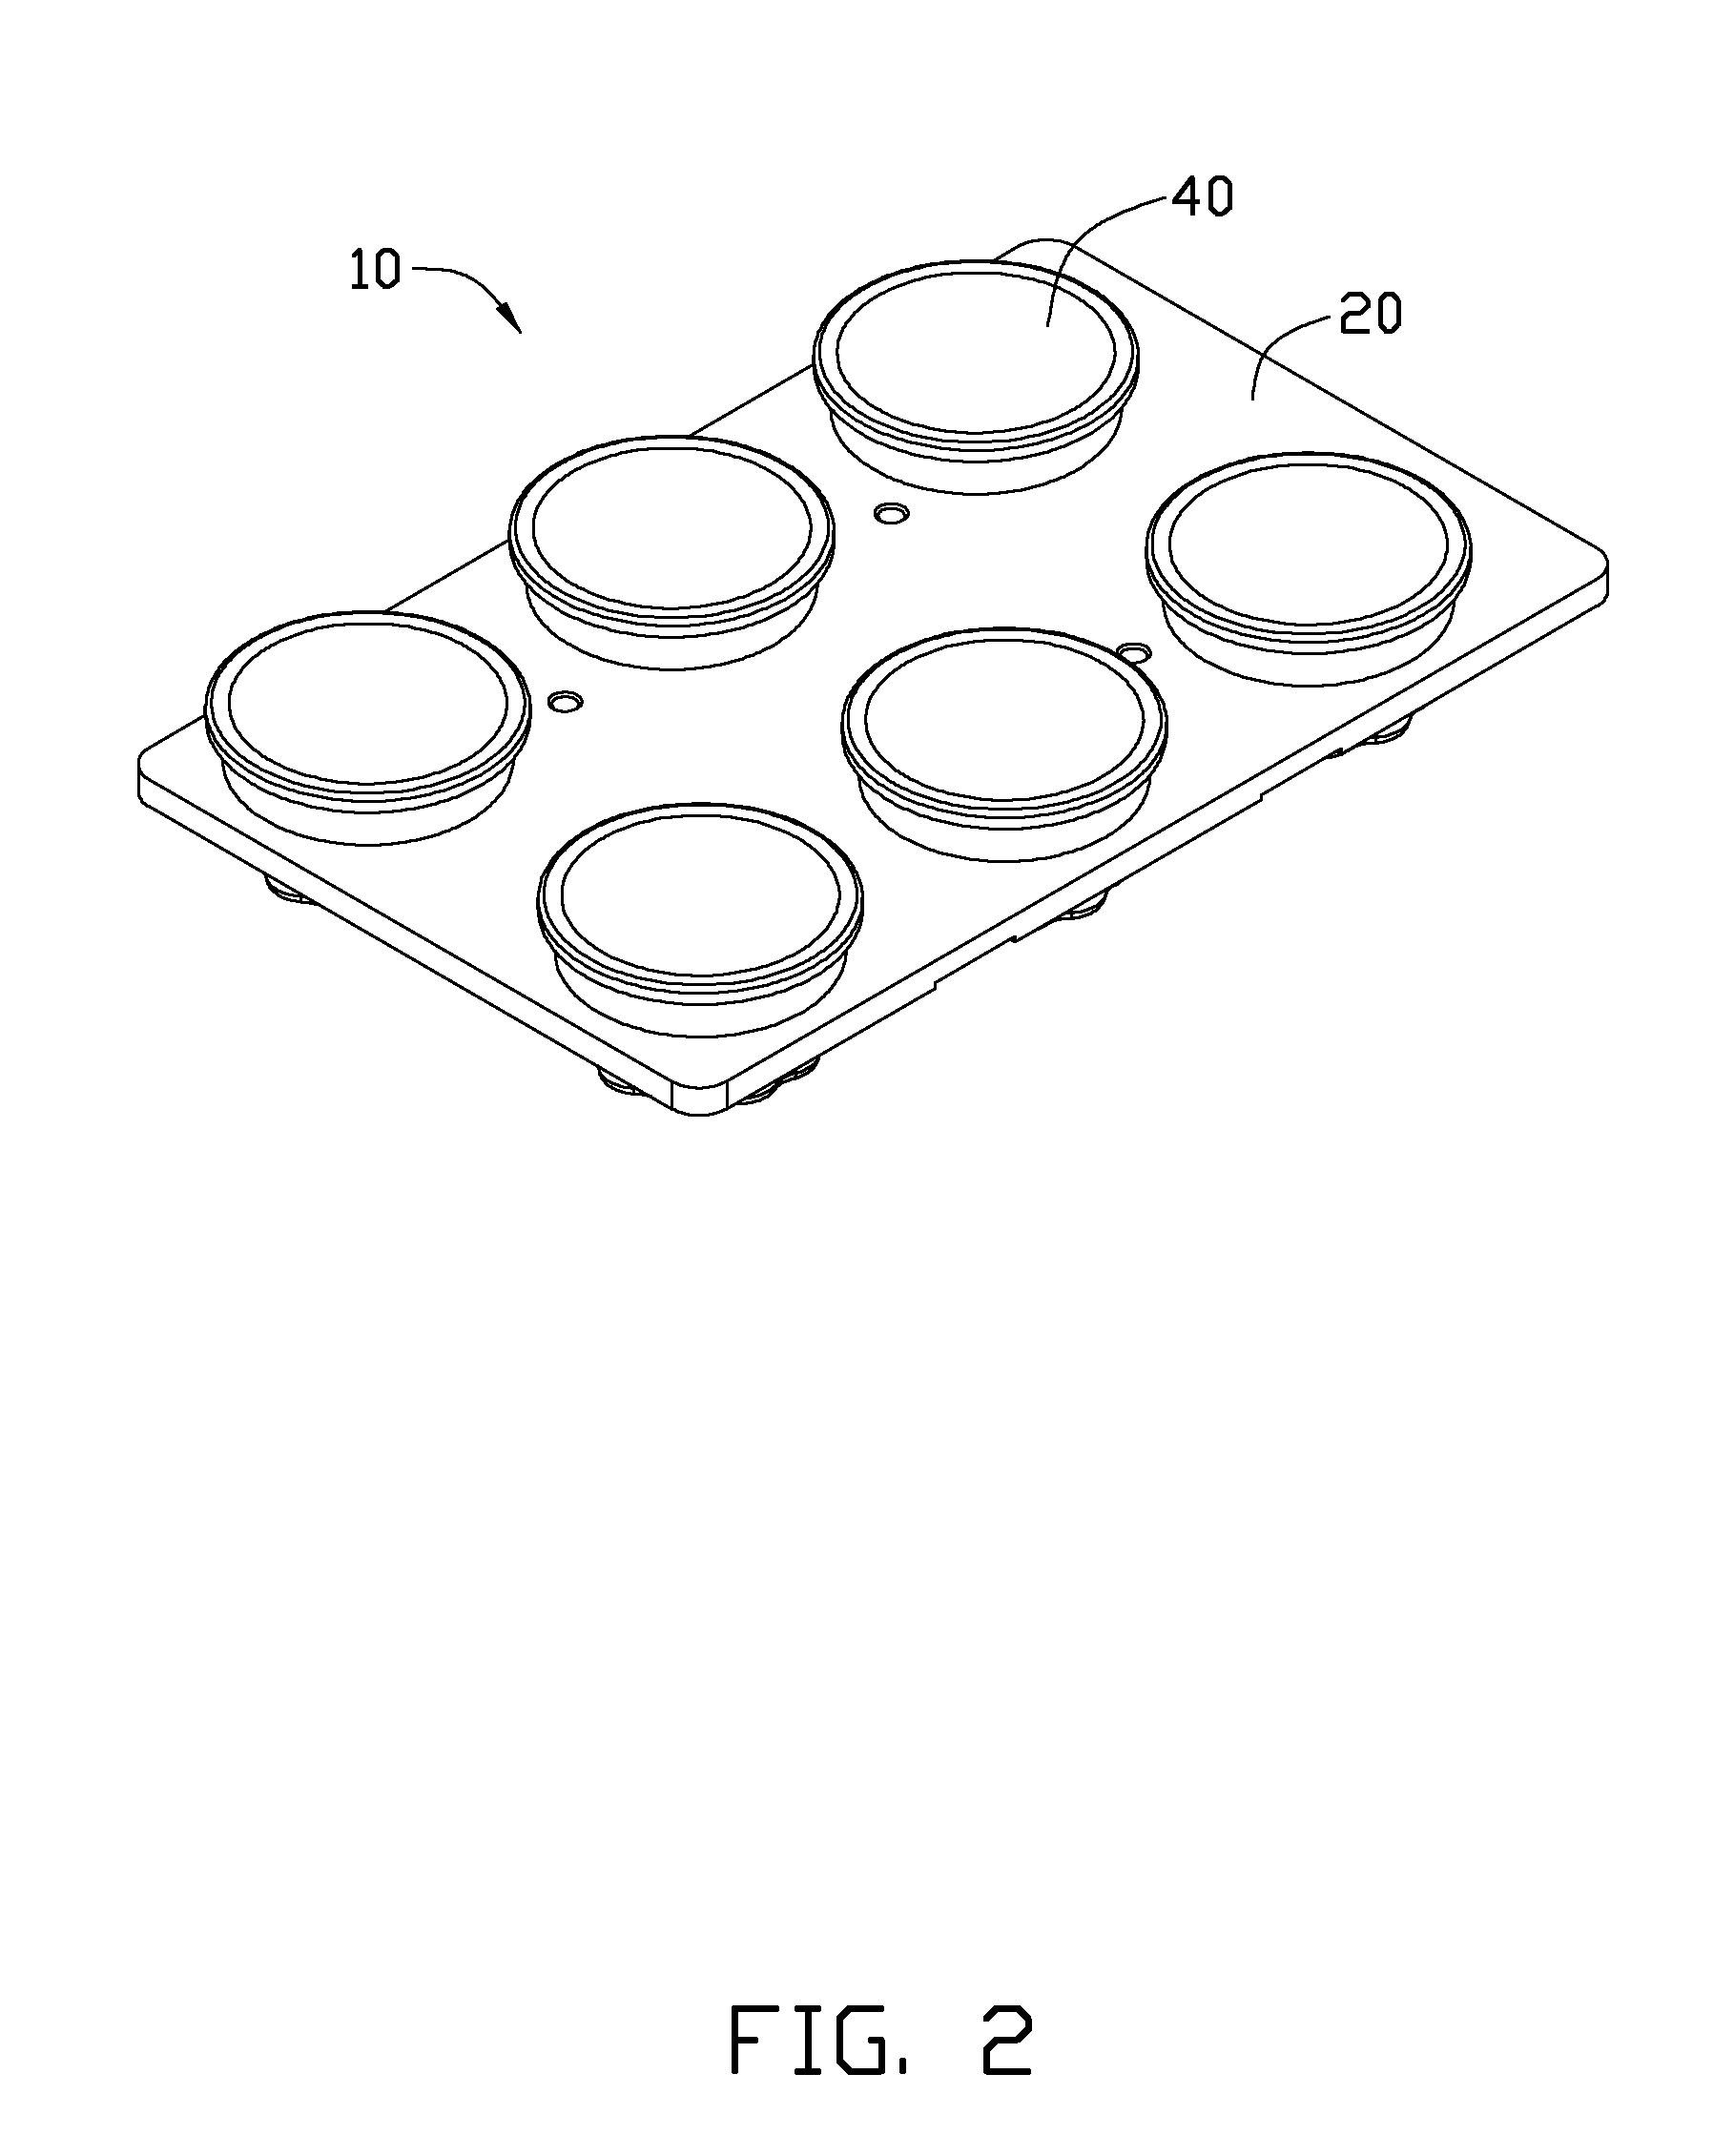 Disassembly device